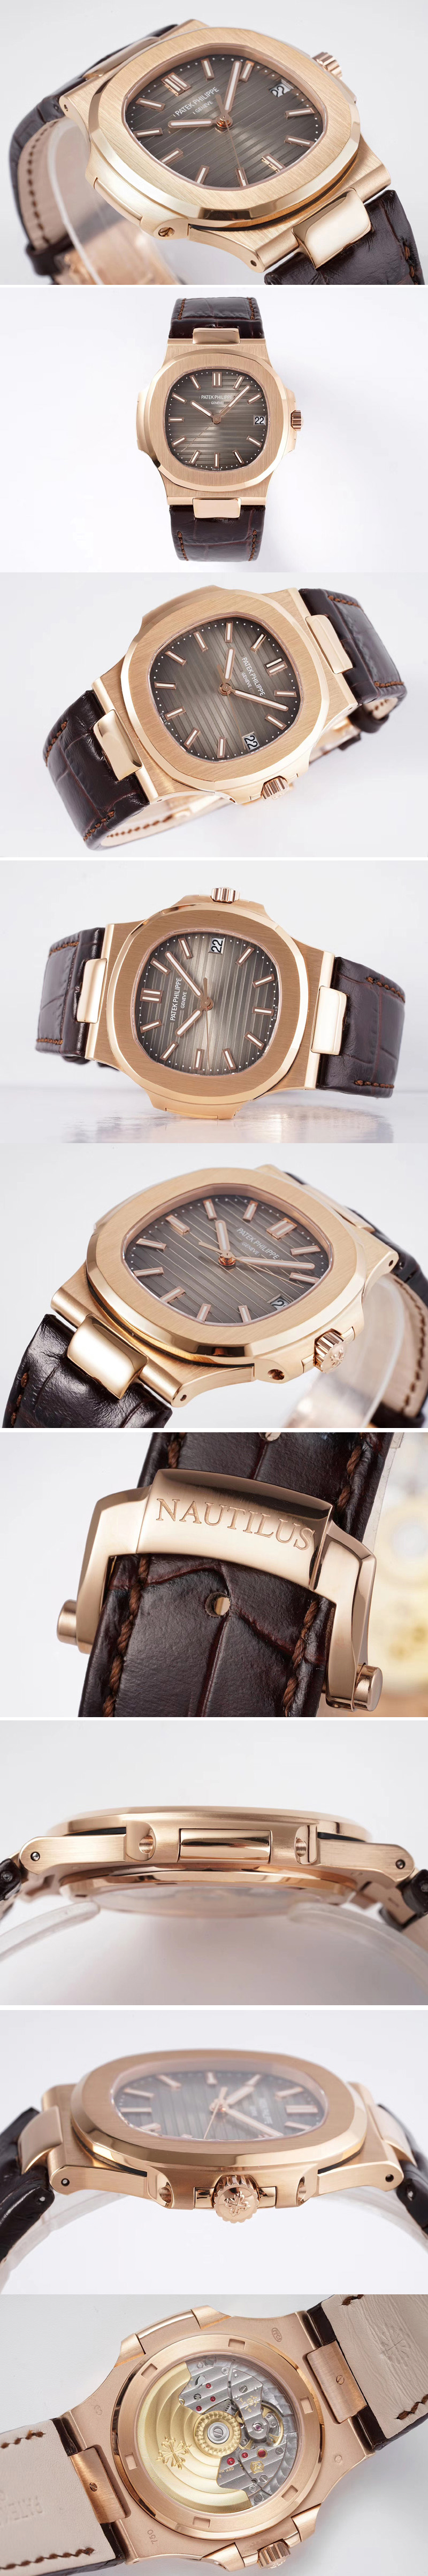 Replica Patek Philippe Nautilus 5711/1R PPF V4 1:1 Best Edition Brown Textured Dial on Brown Leather Strap 324CS (Free box)